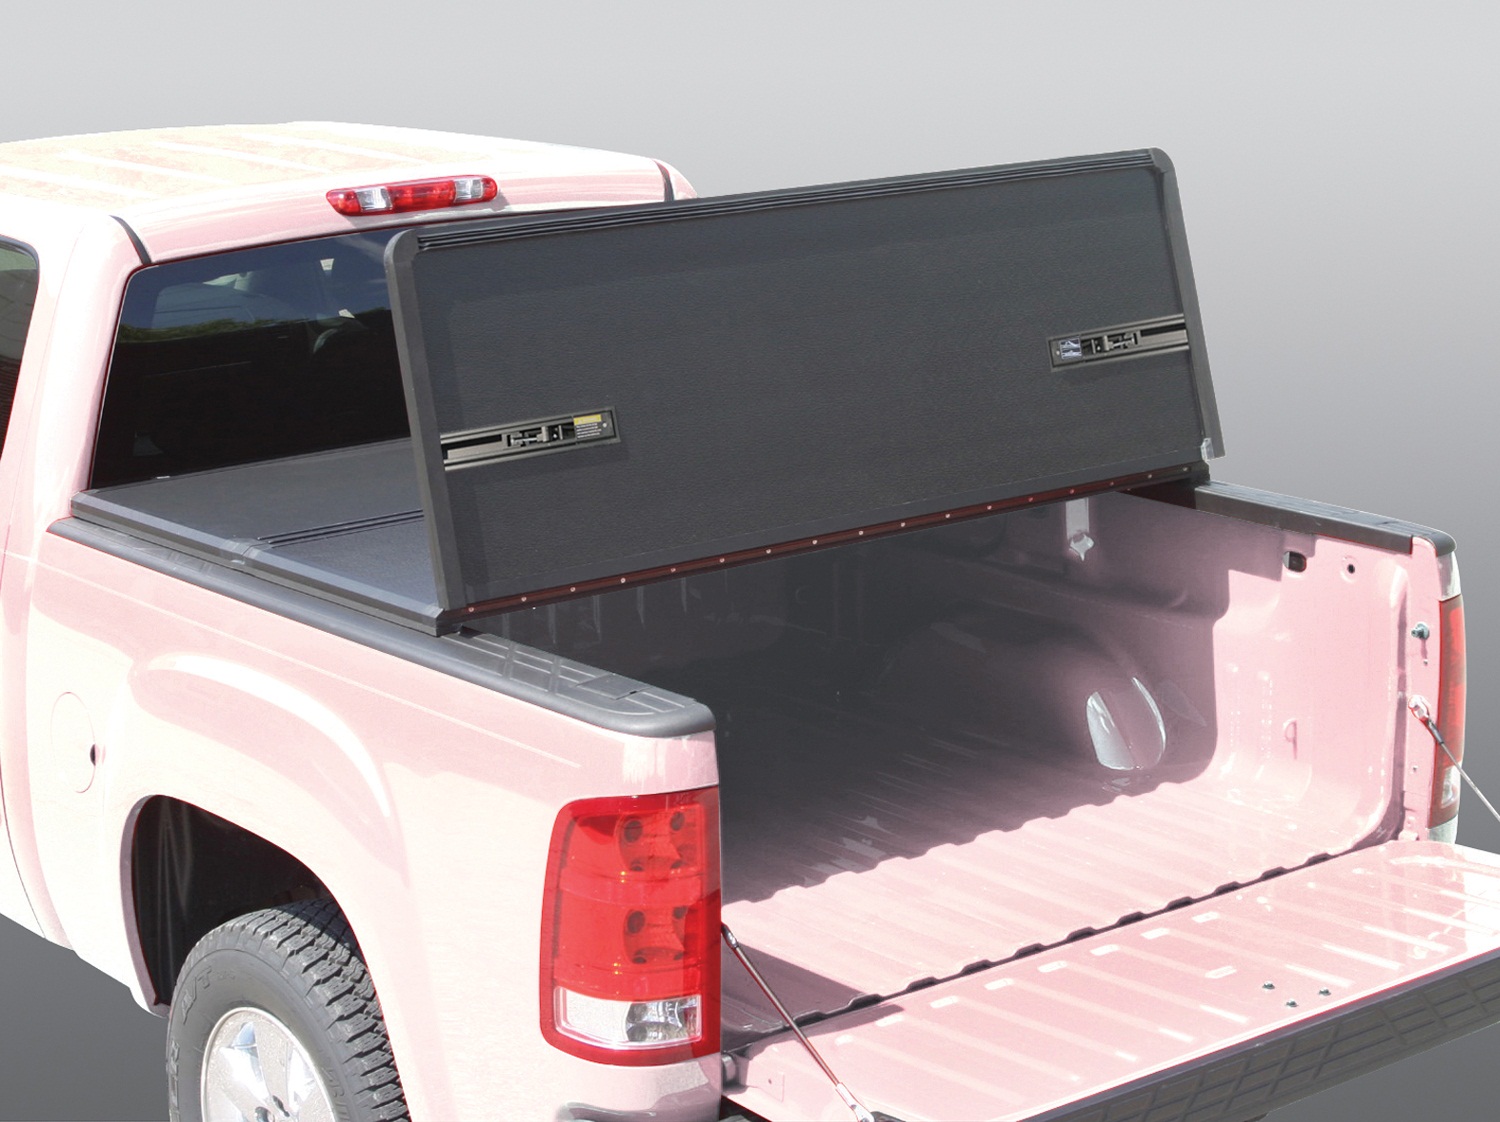 Rugged Liner Rugged Liner HC-NFK605 Rugged Cover; Tonneau Cover Fits 05-13 Equator Frontier